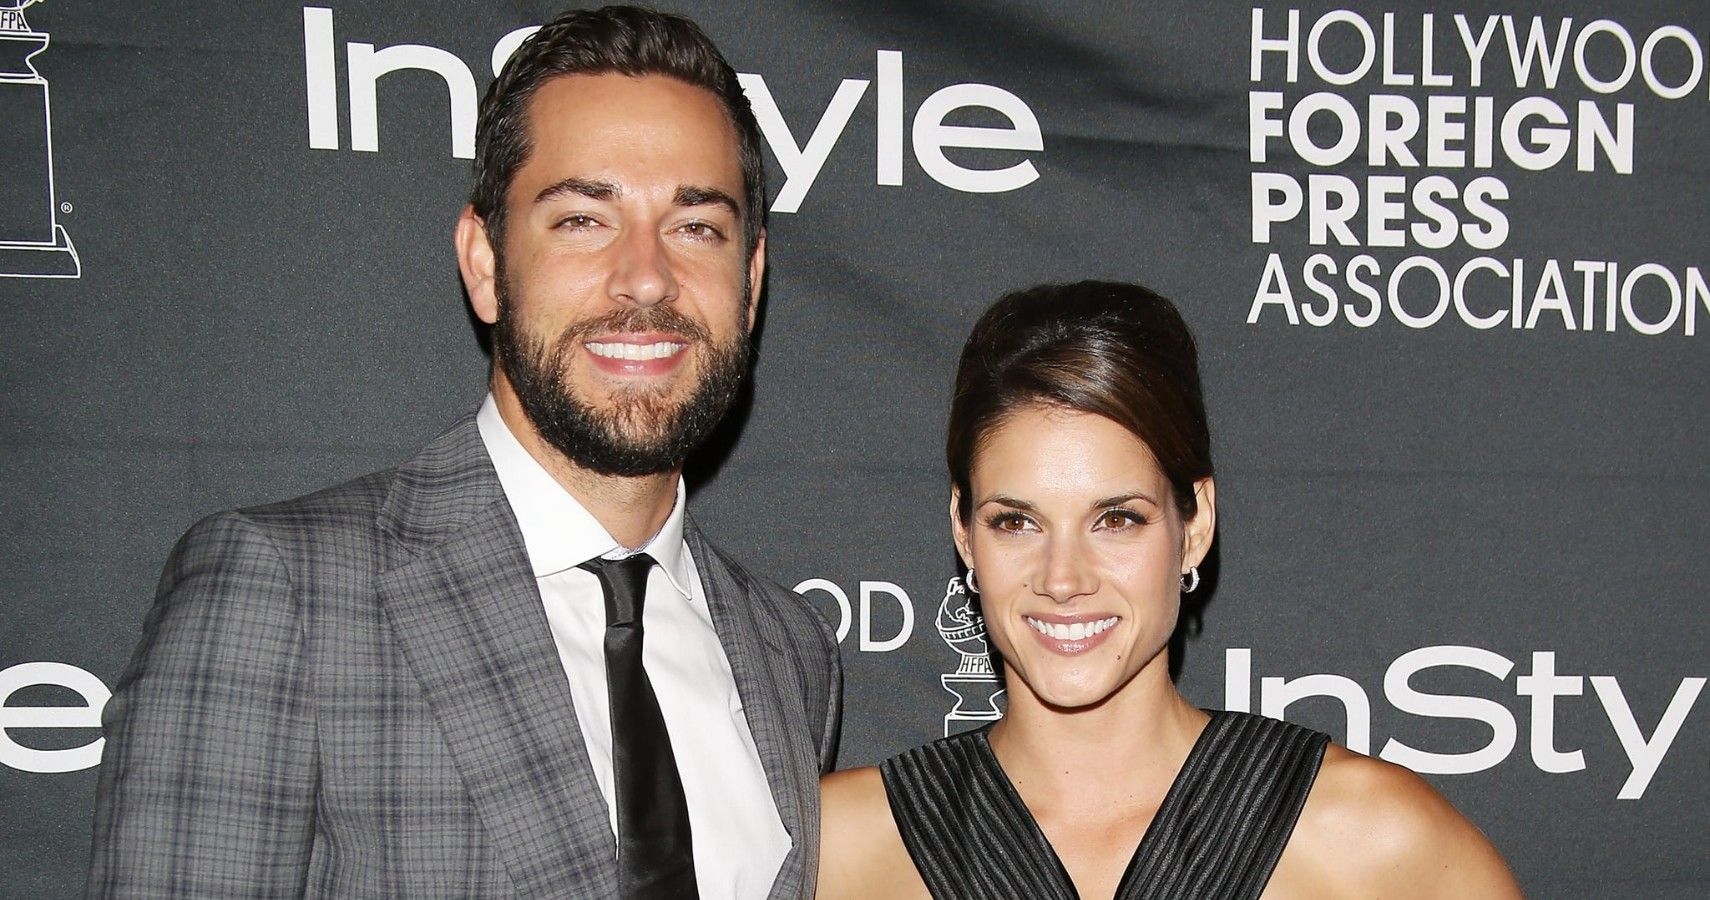 What Happened Between Zachary Levi And Ex Wife, Missy Peregrym?